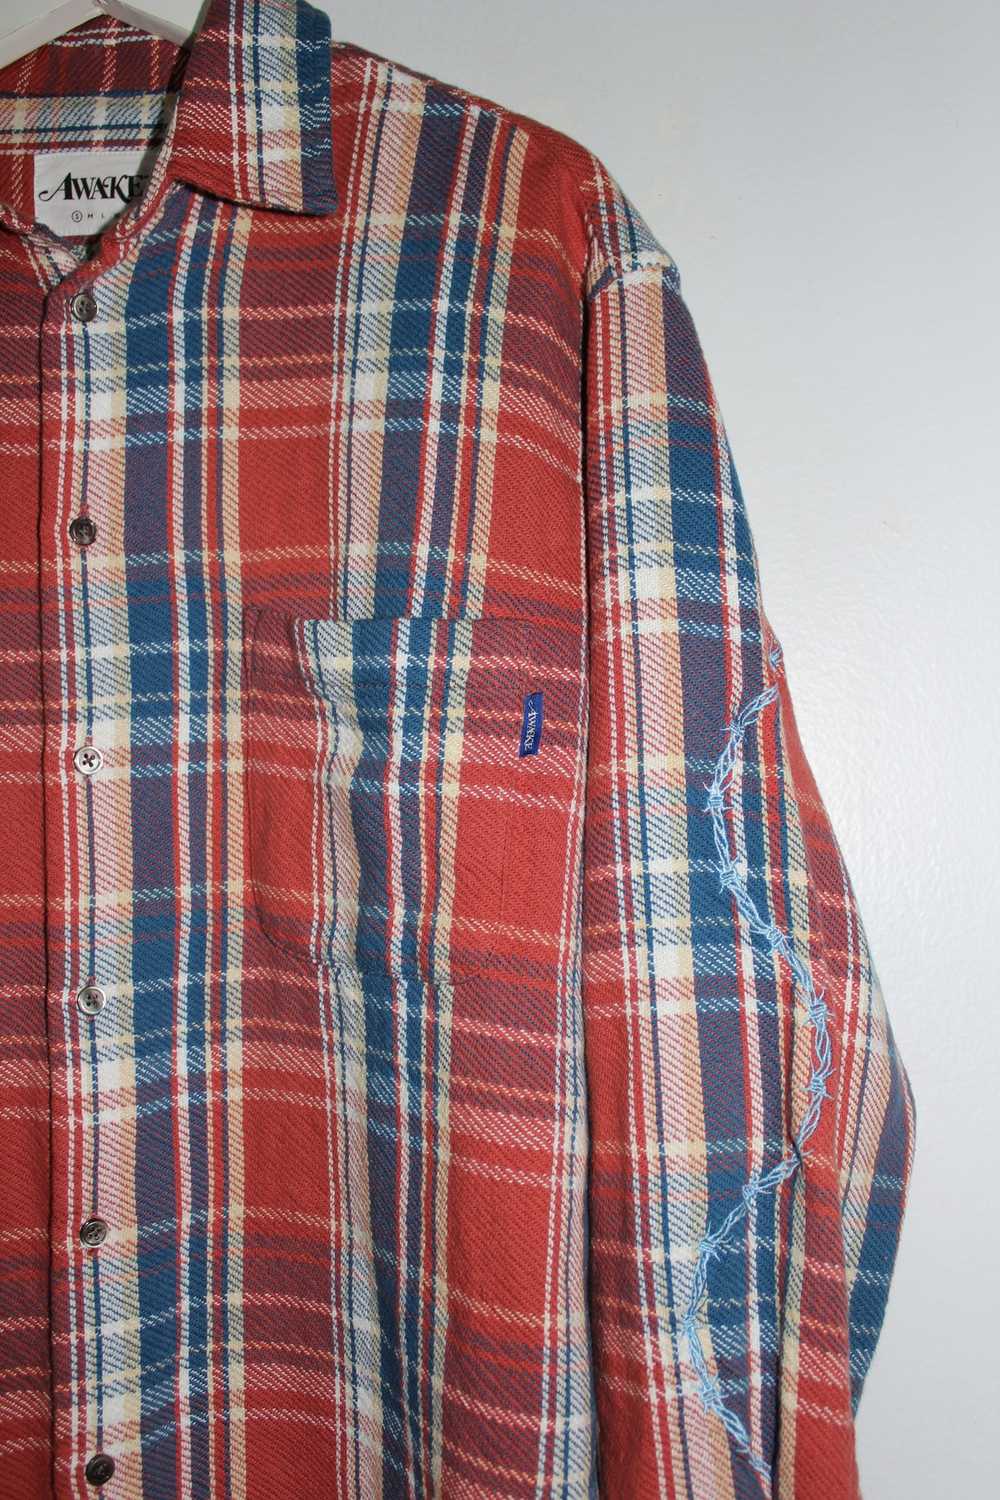 Awake Heavyweight Barbed Wire Back Flannel - image 4